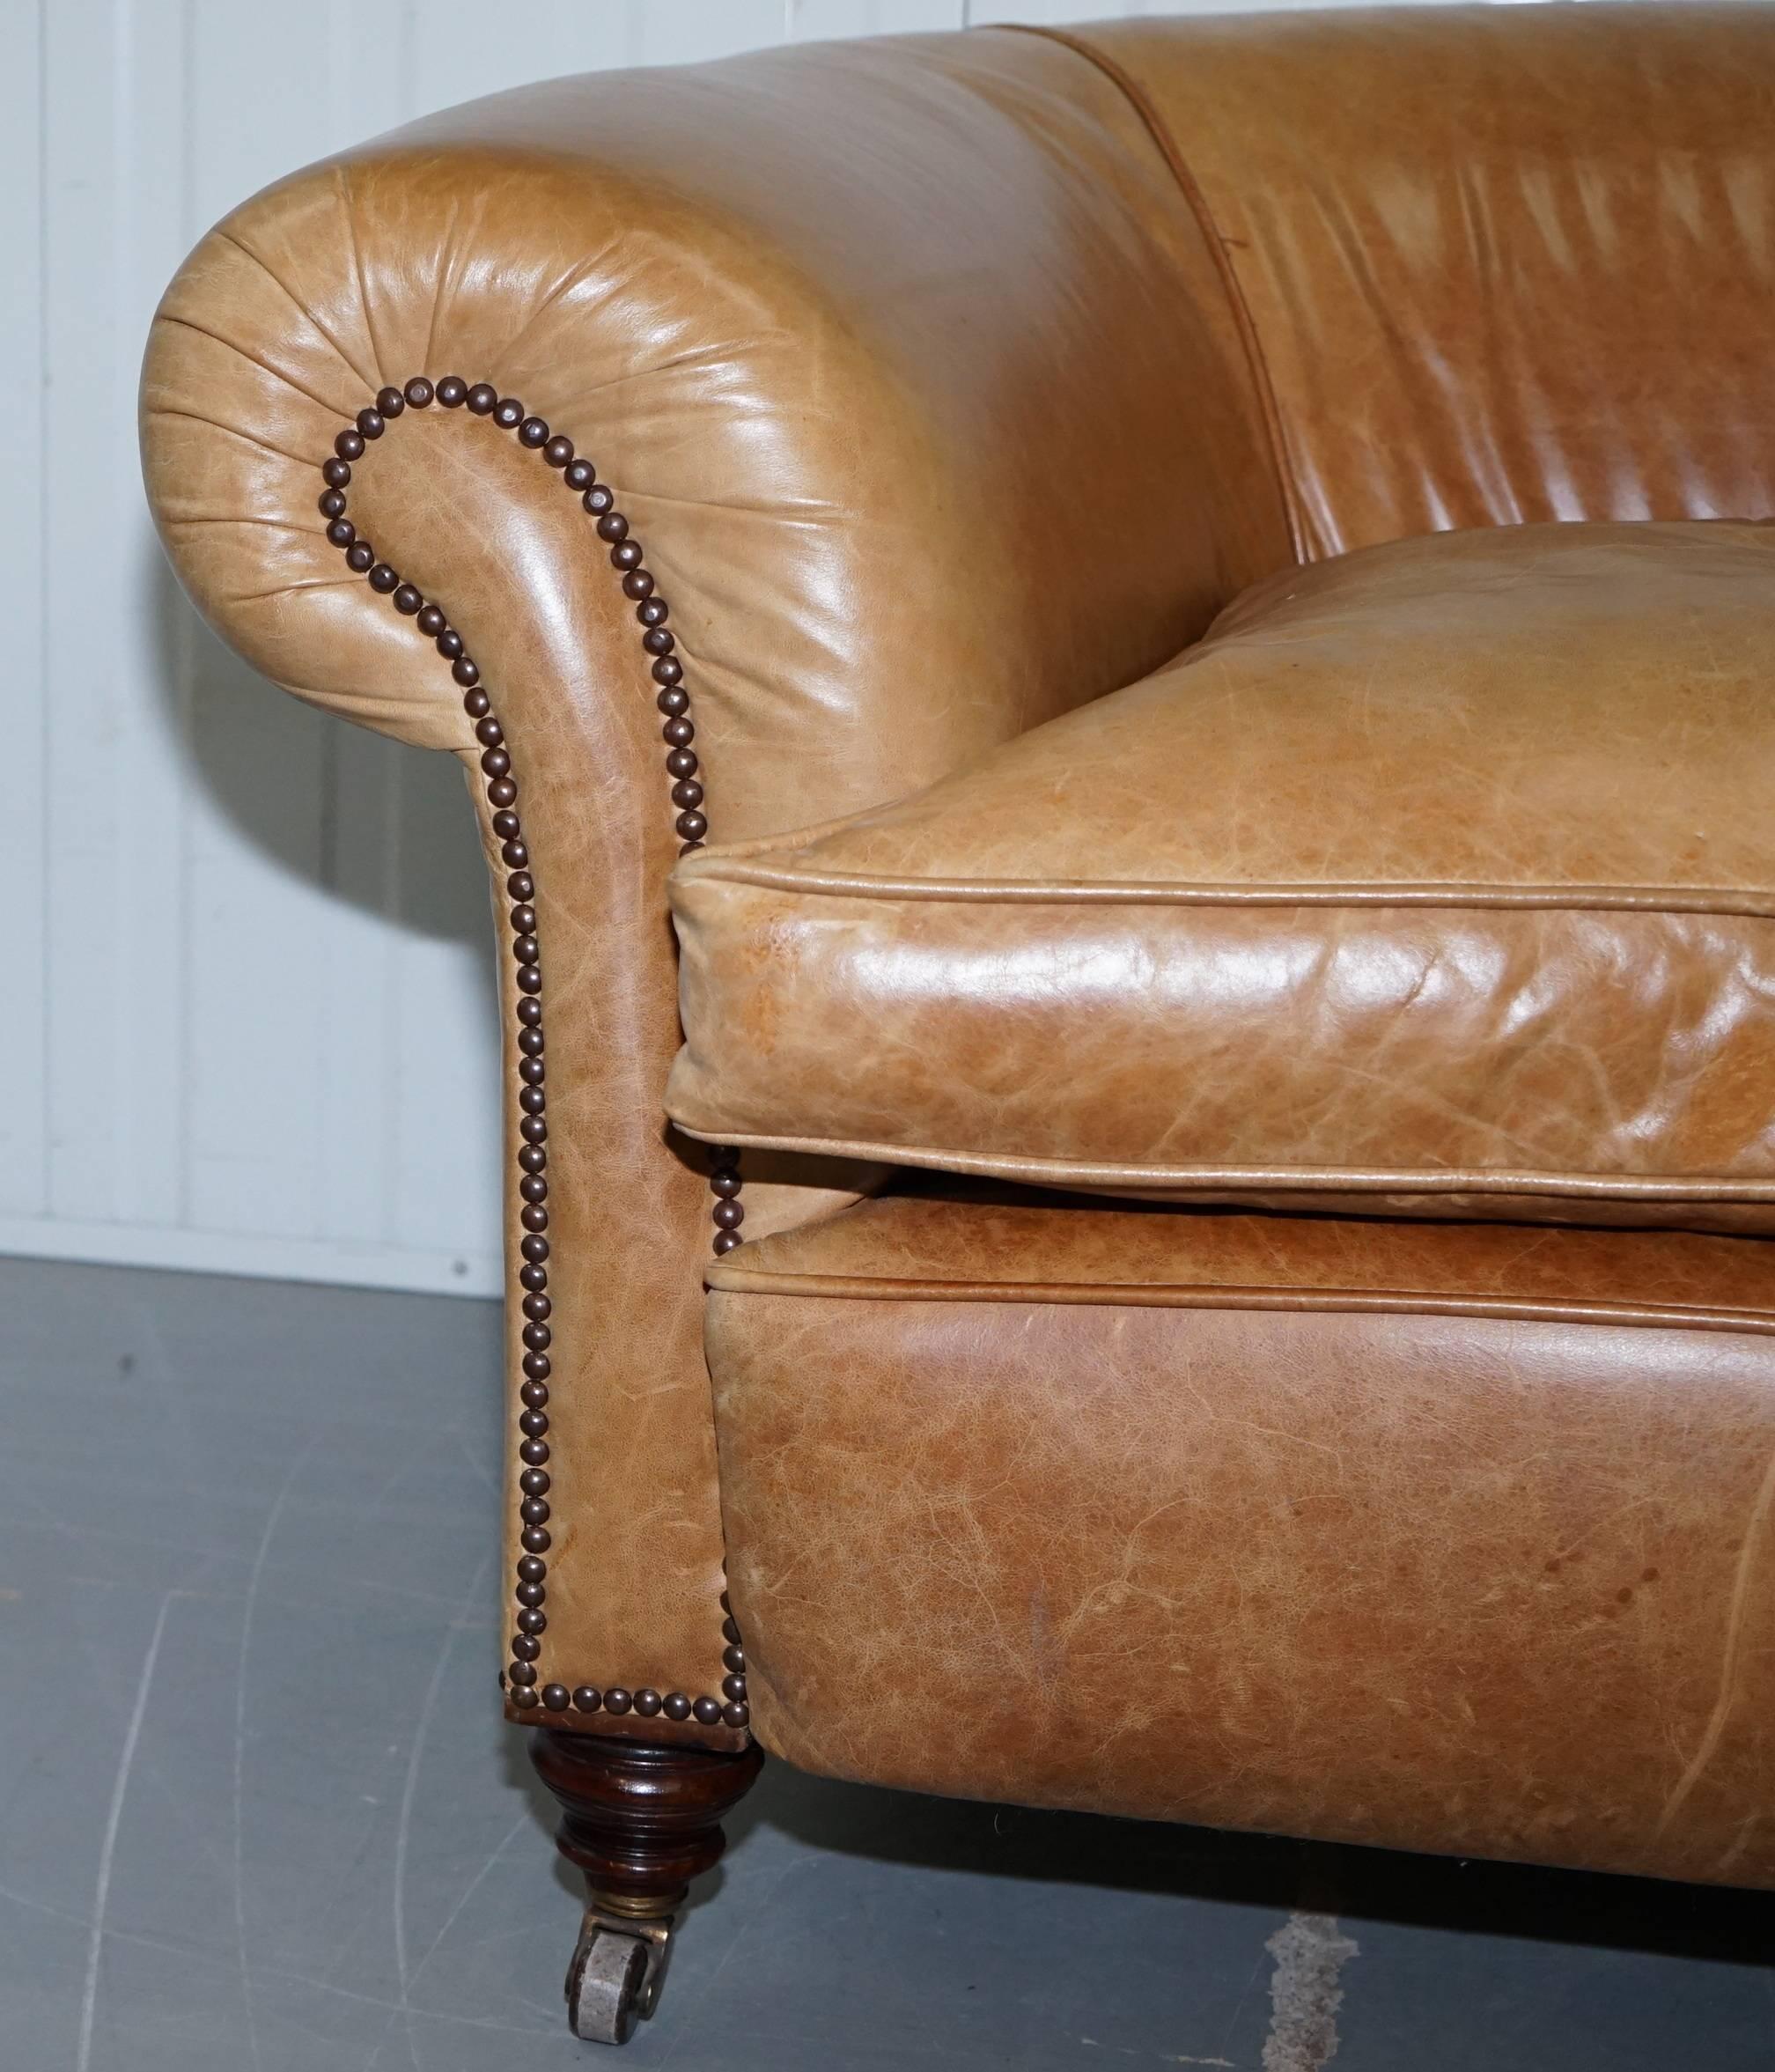 1 of 2 Victorian Brown Leather Sofas Stamped Back Leg Coil Sprung Feather Filled 4